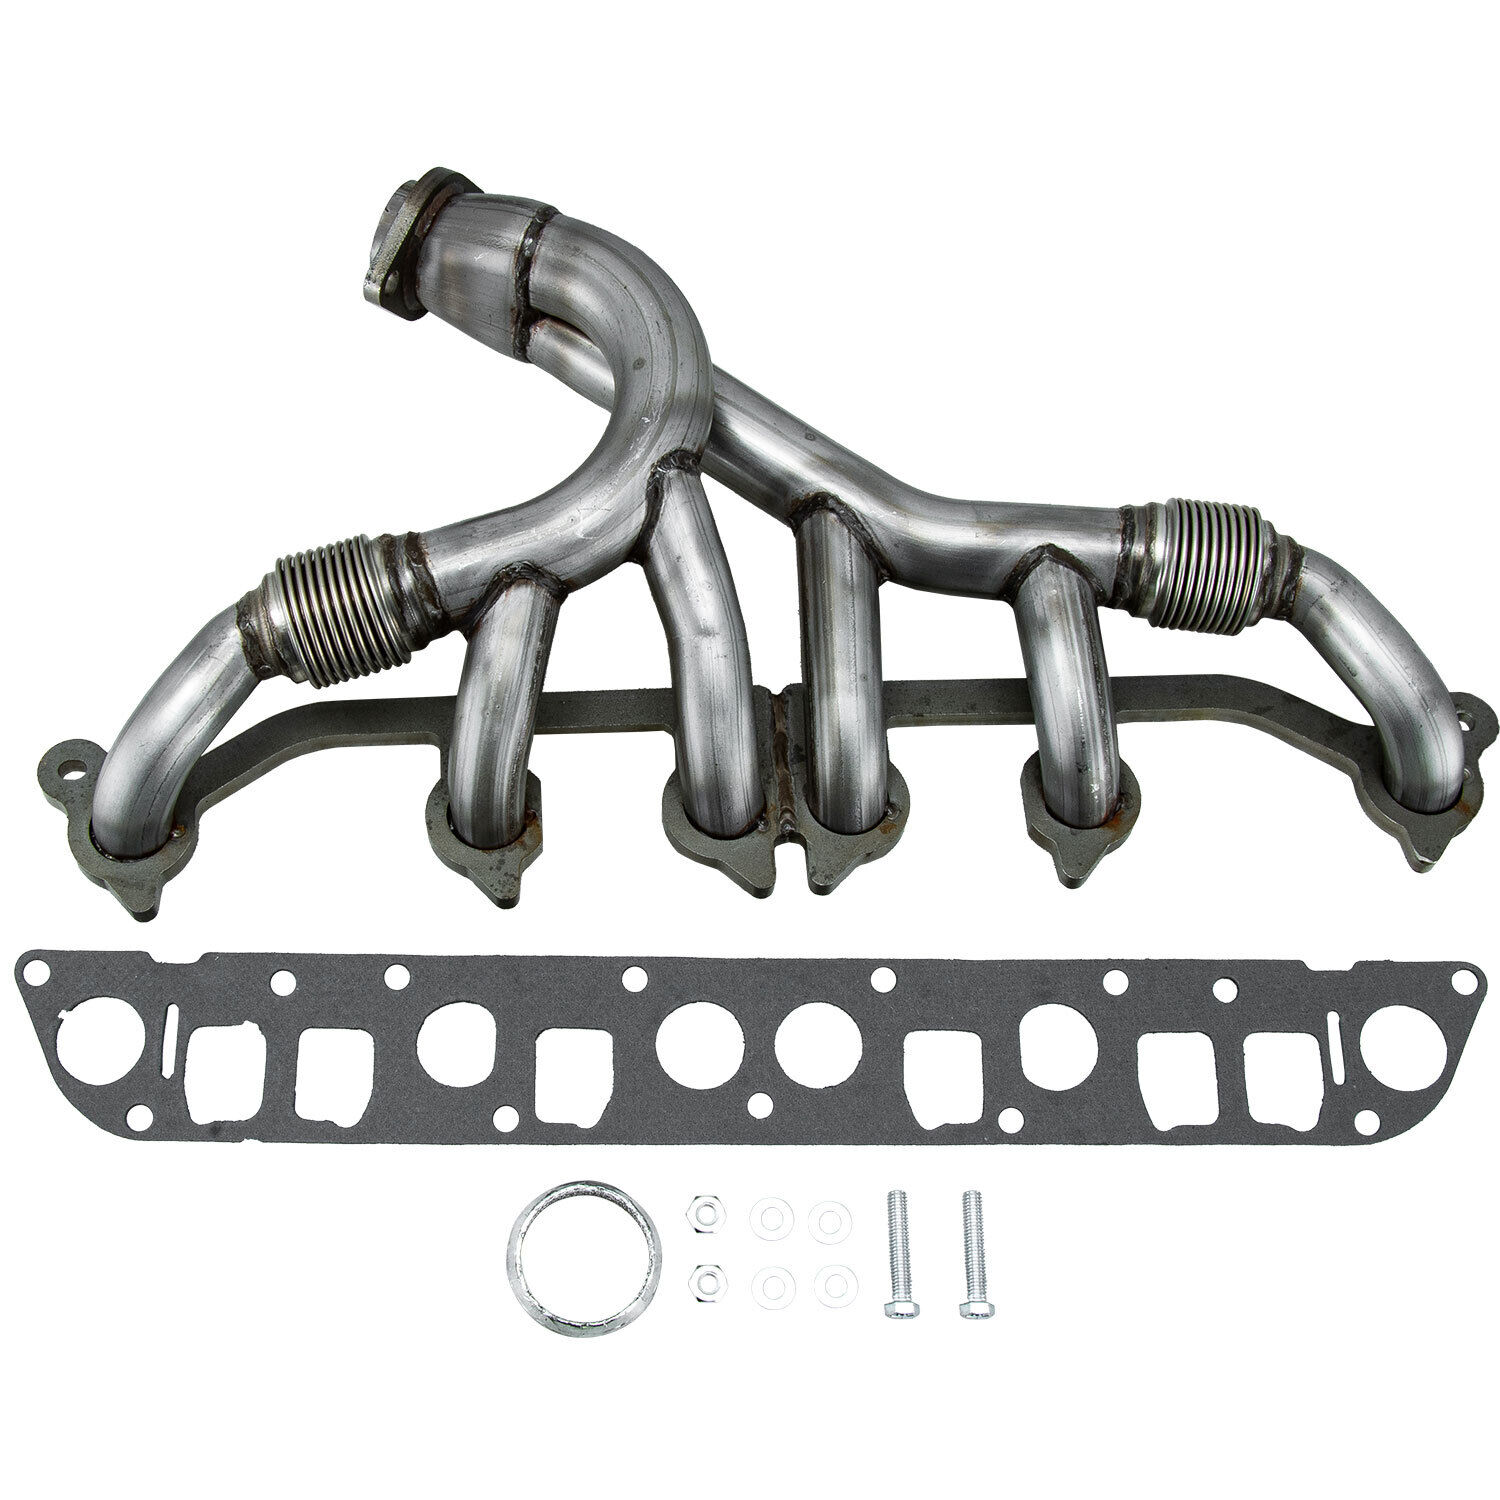 Exhaust Manifold&Gasket Kit for 91-99 Jeep Wrangler Comanche Grand Cherokee 4.0L